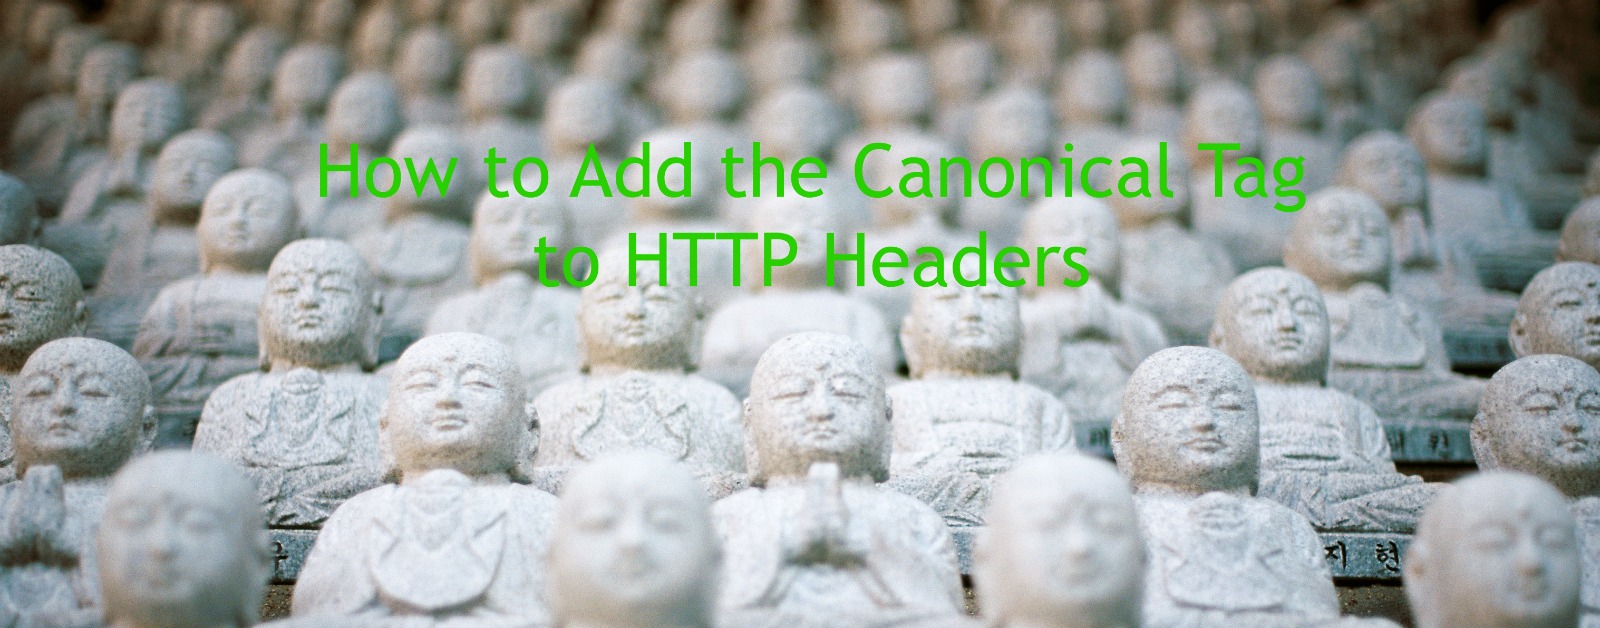 How to Add the Canonical Tag to HTTP Headers